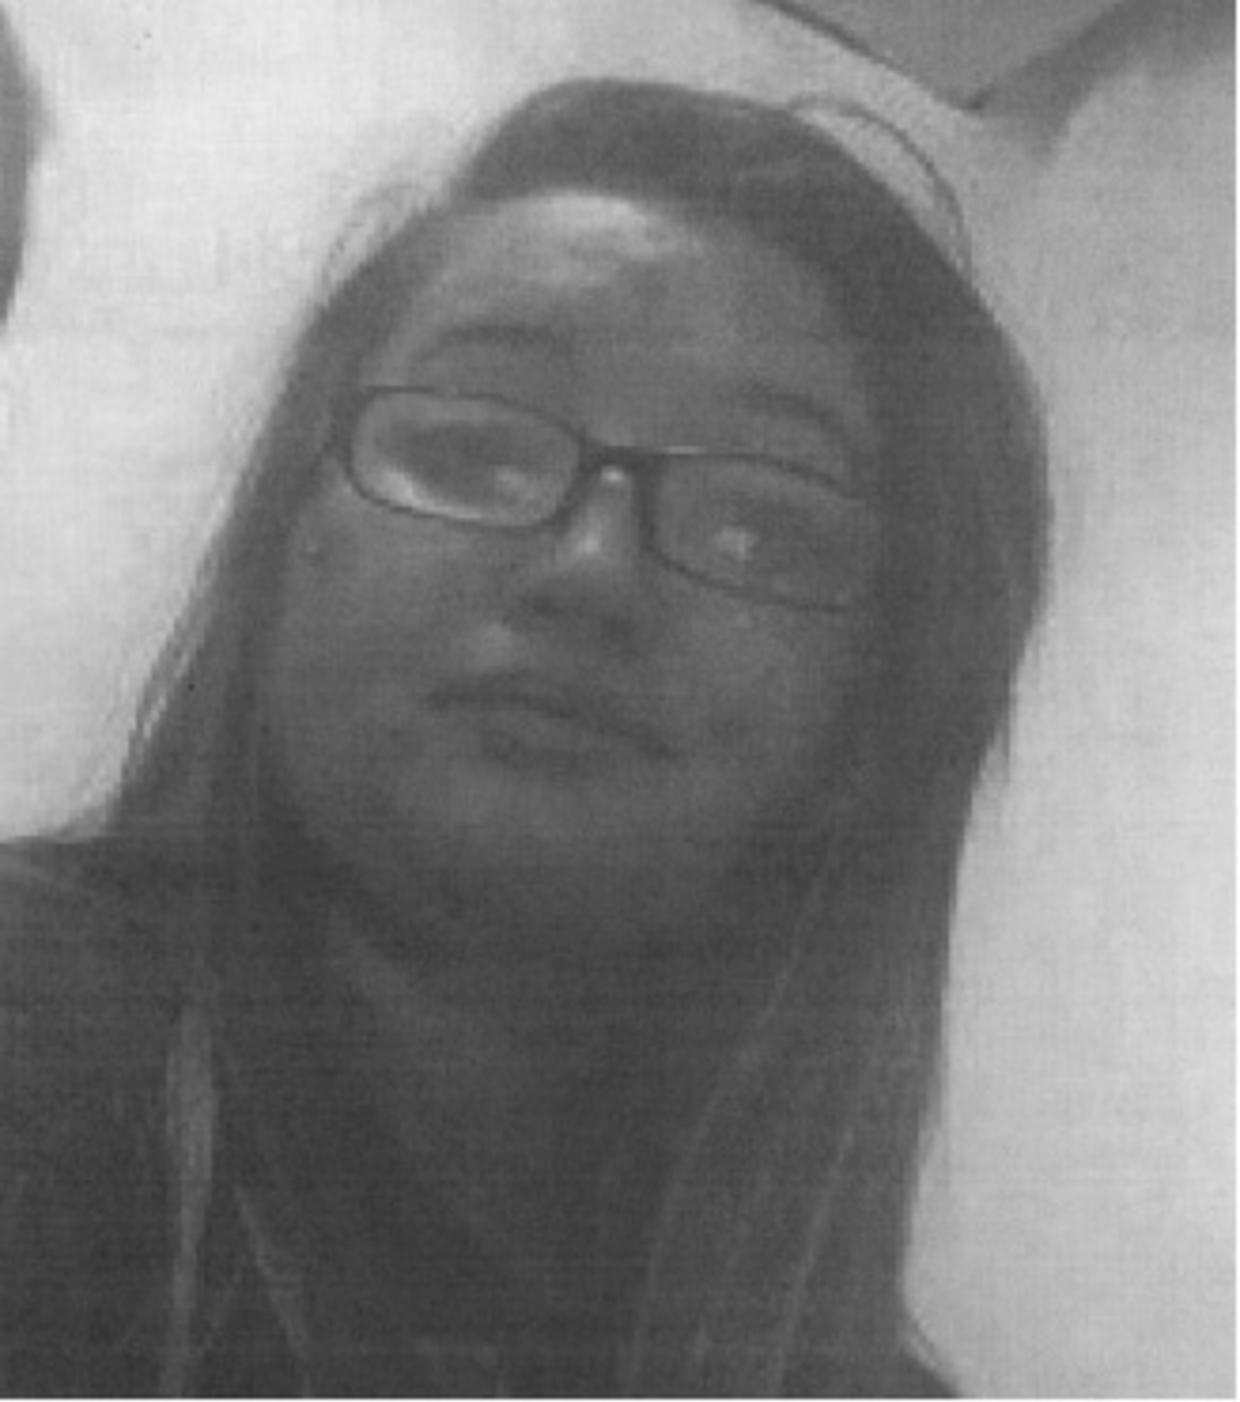 15 Year Old Girl Reported Missing From Albany Park Cbs Chicago 4695